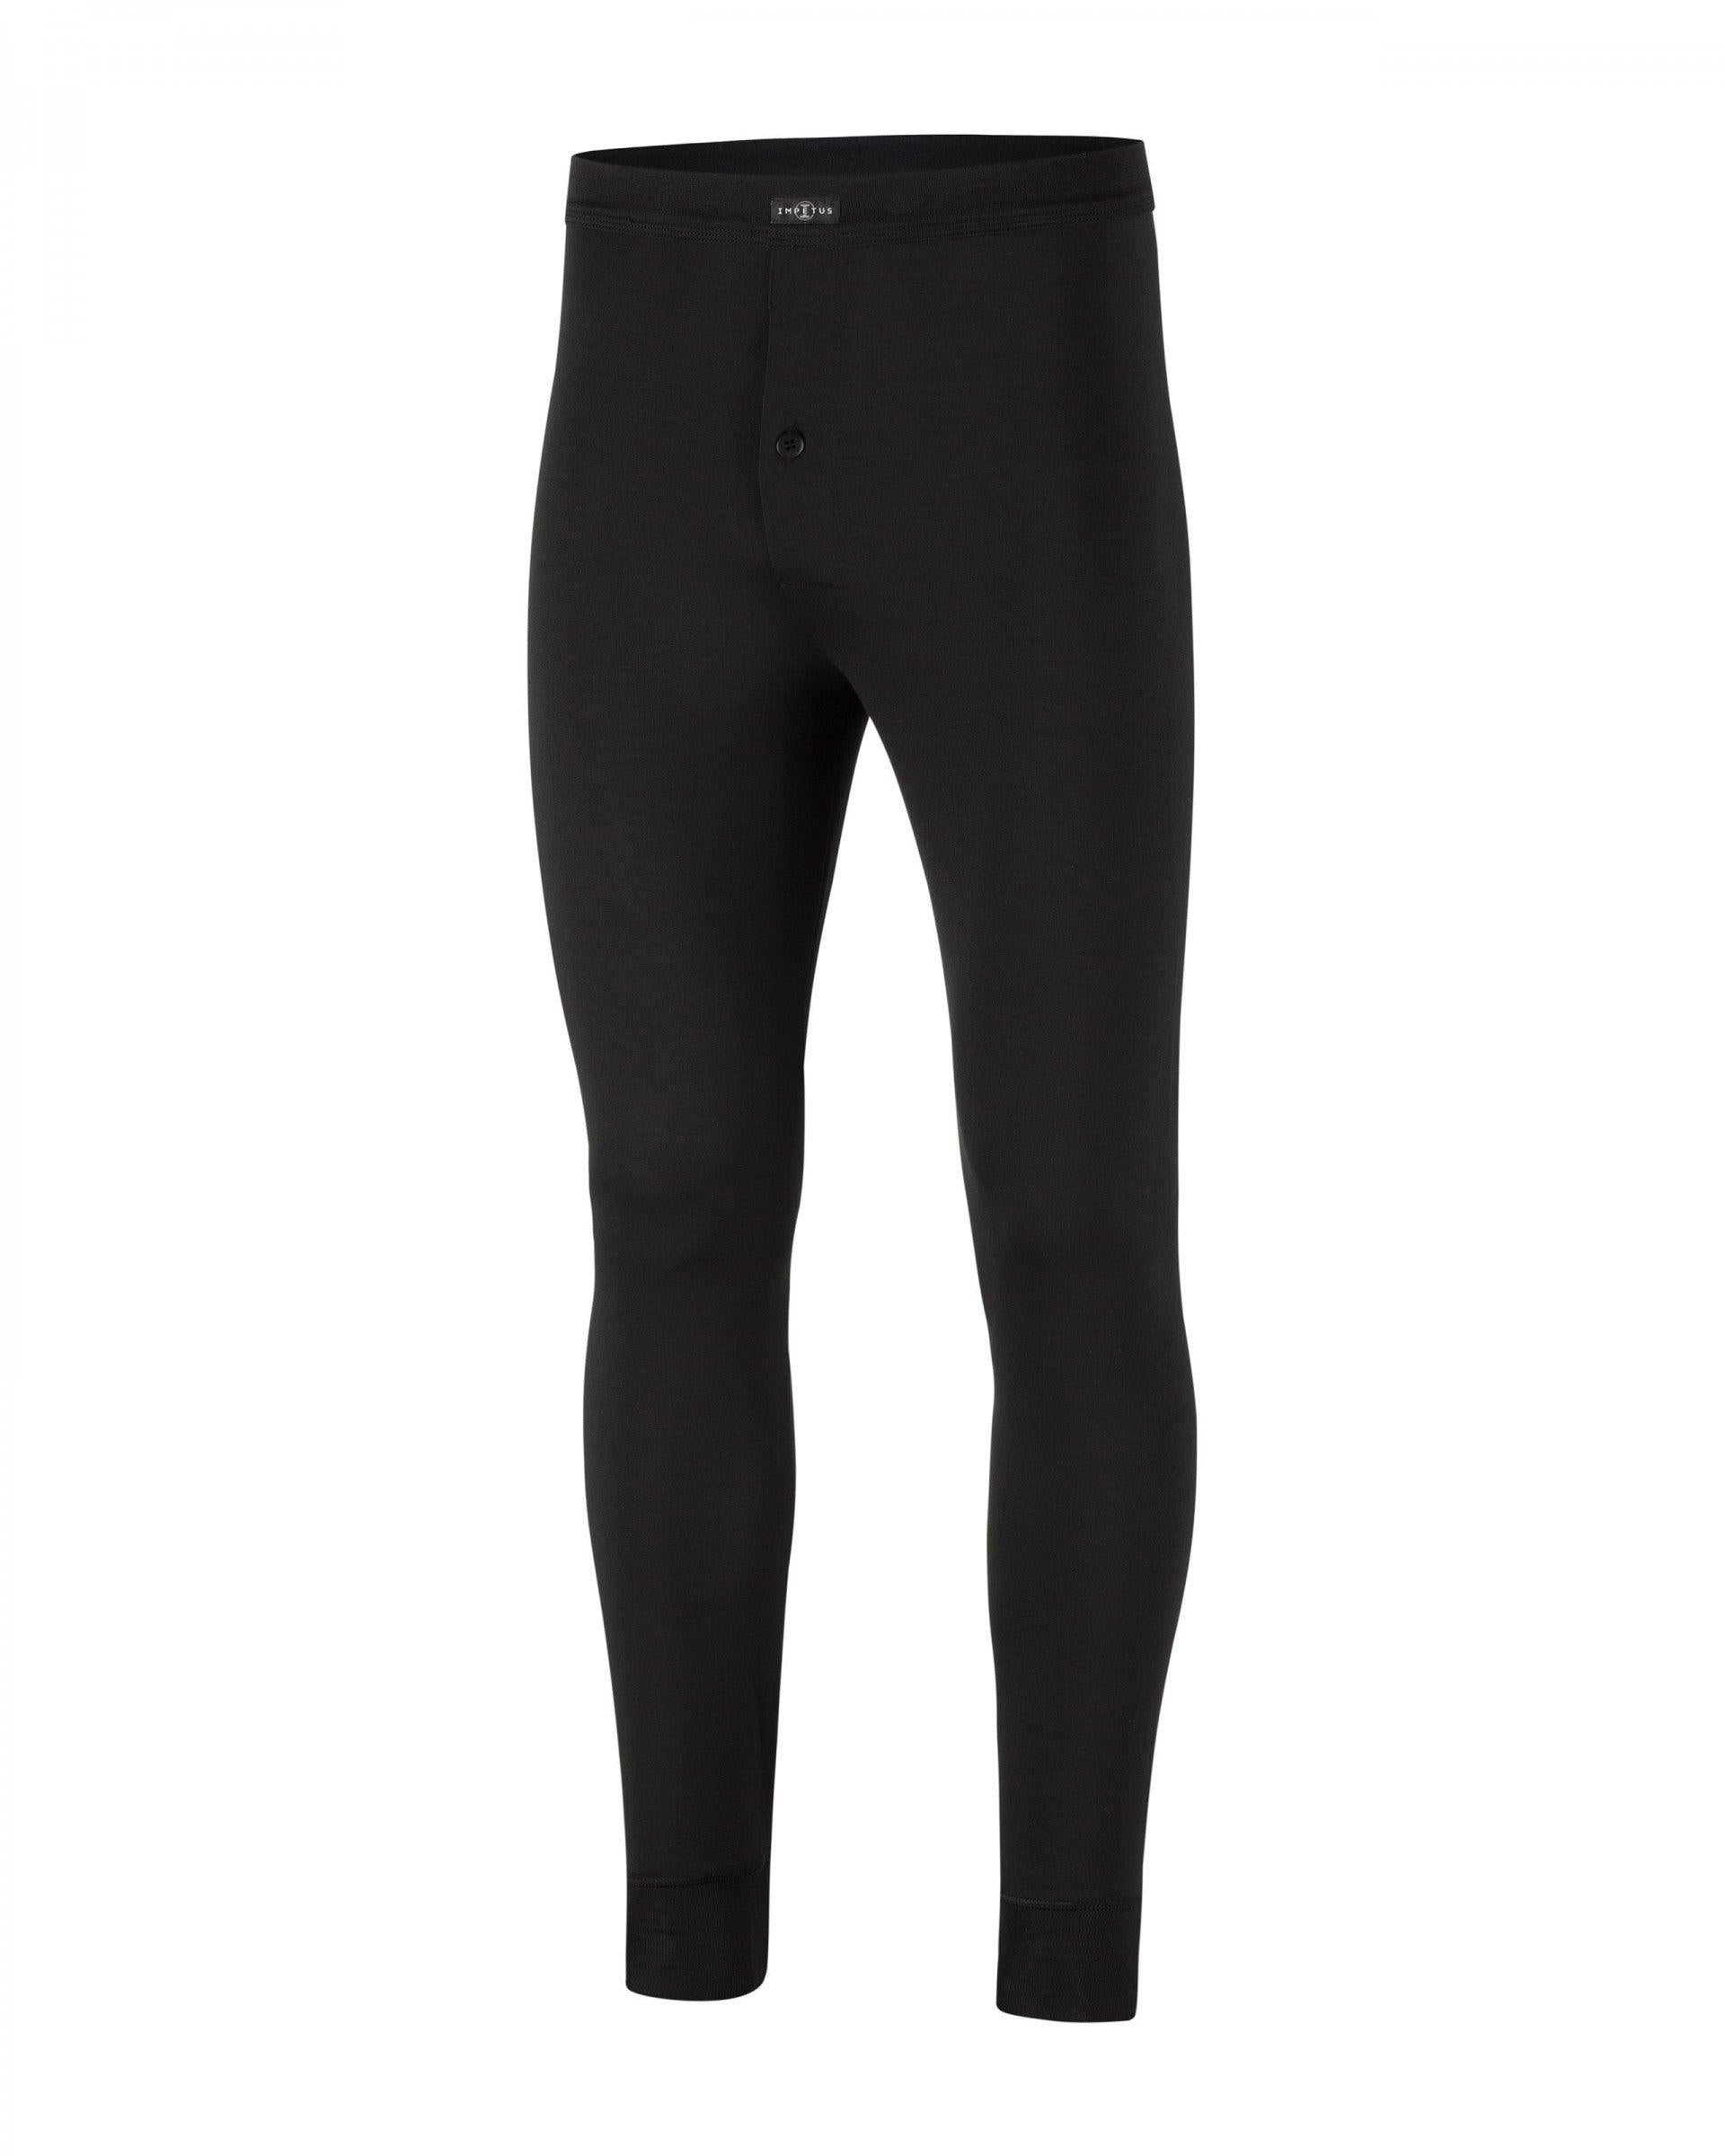 Thermal Underwear for Men - Thermo - sinnohome 